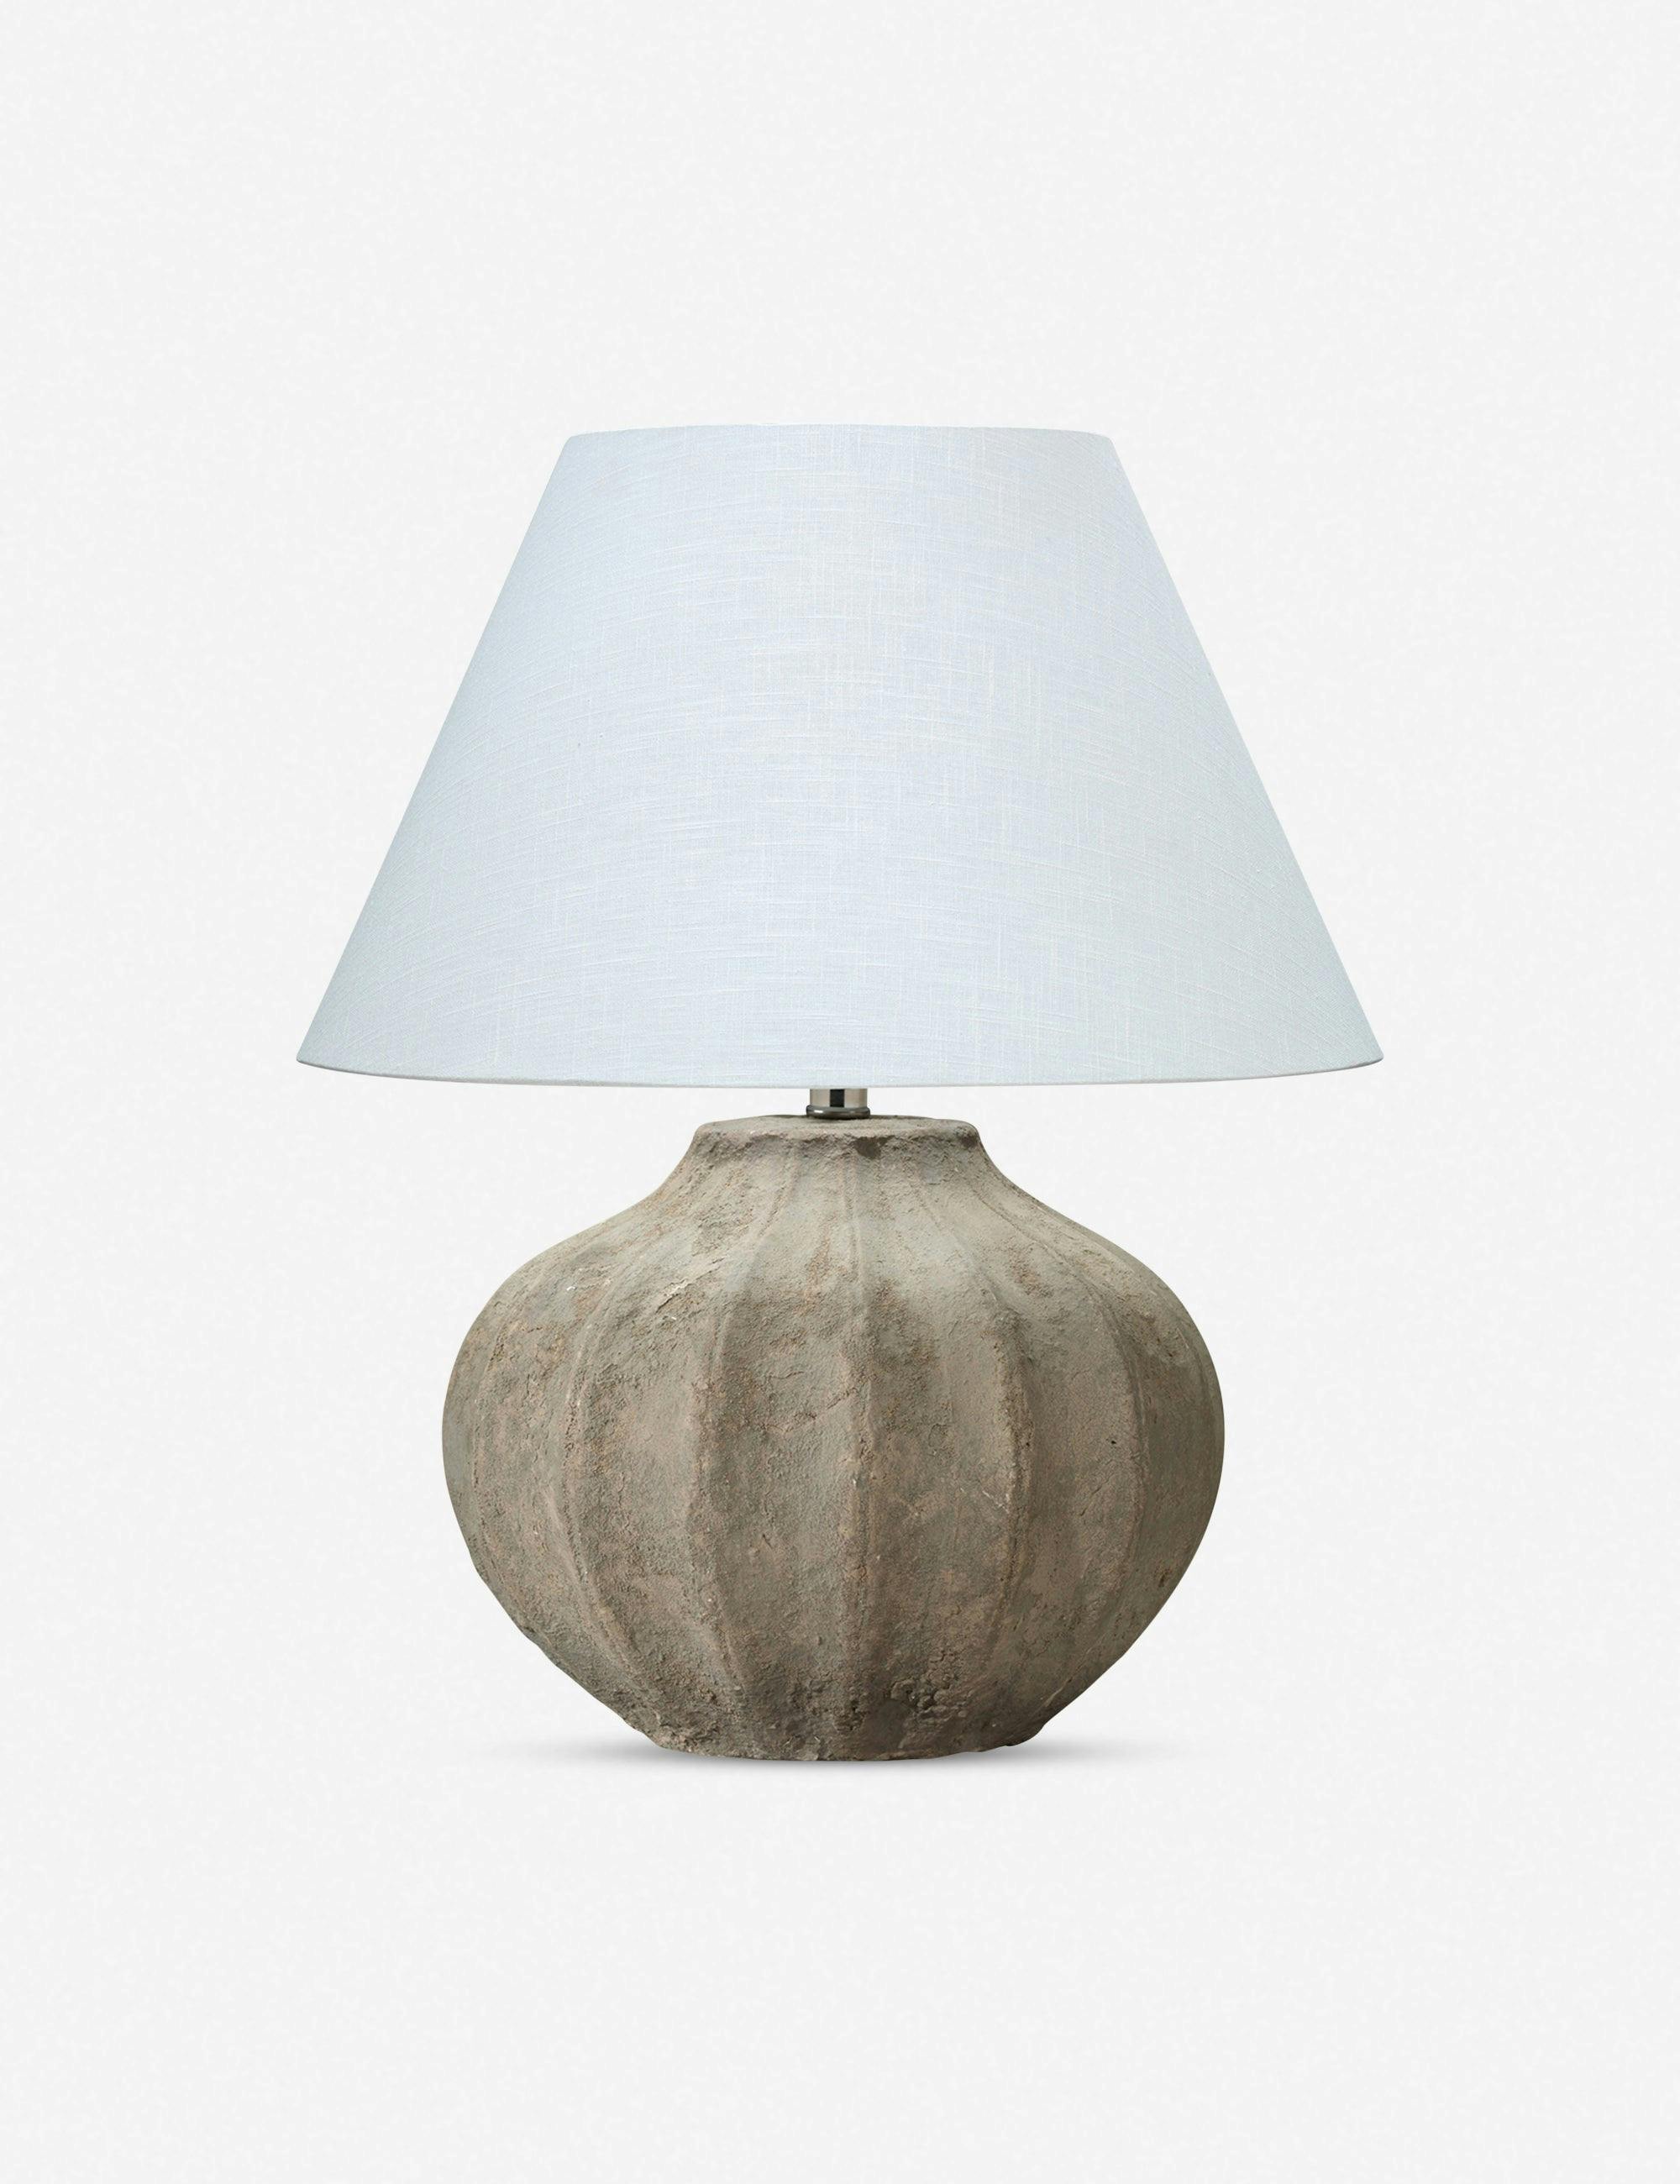 Sorrento Sand Finish Ceramic Table Lamp with White Linen Shade